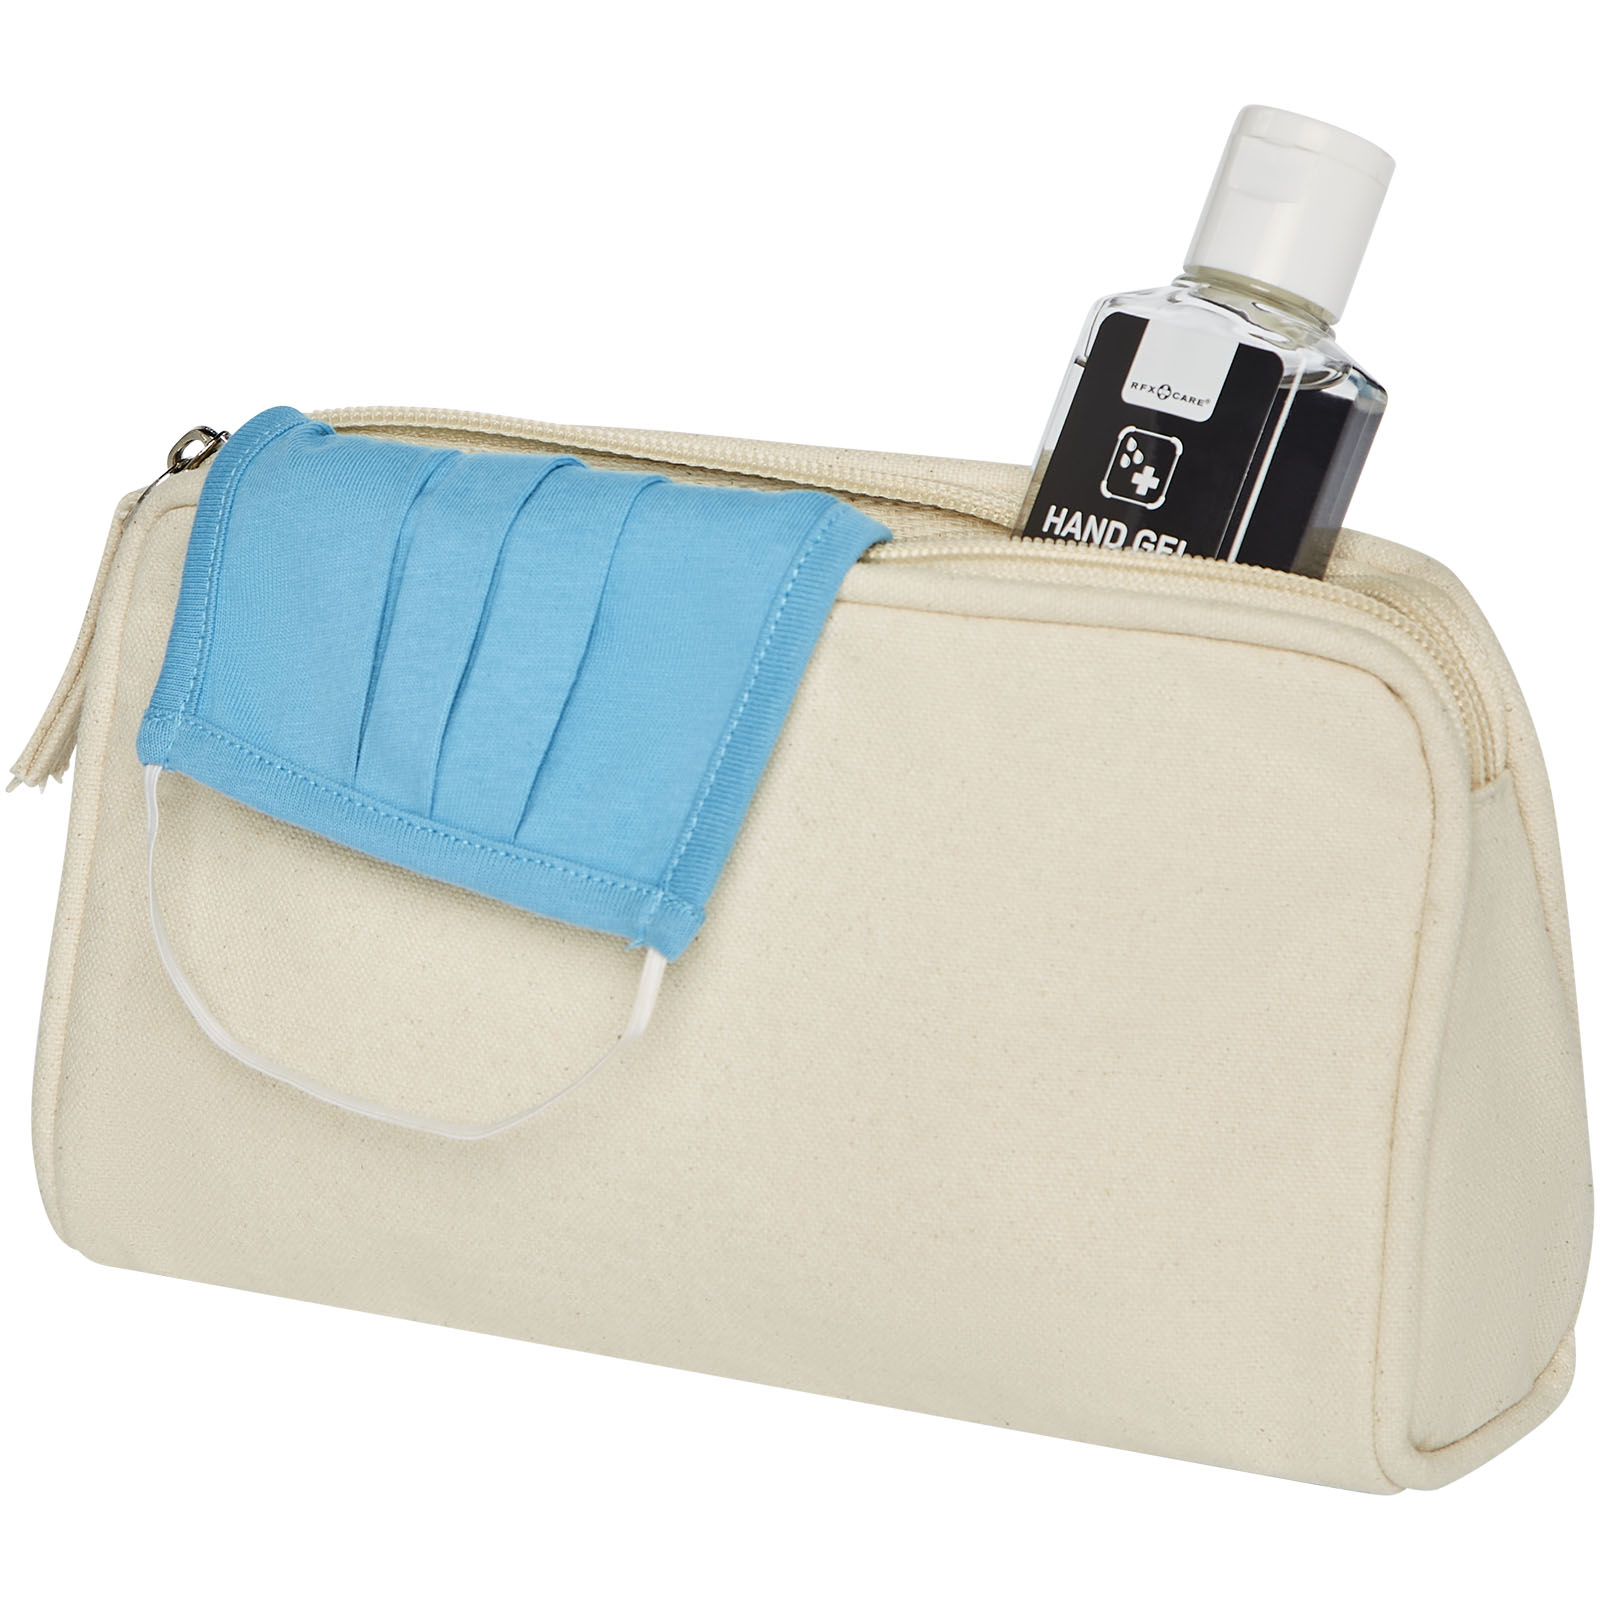 A toiletry bag made of high-density cotton - Rushall